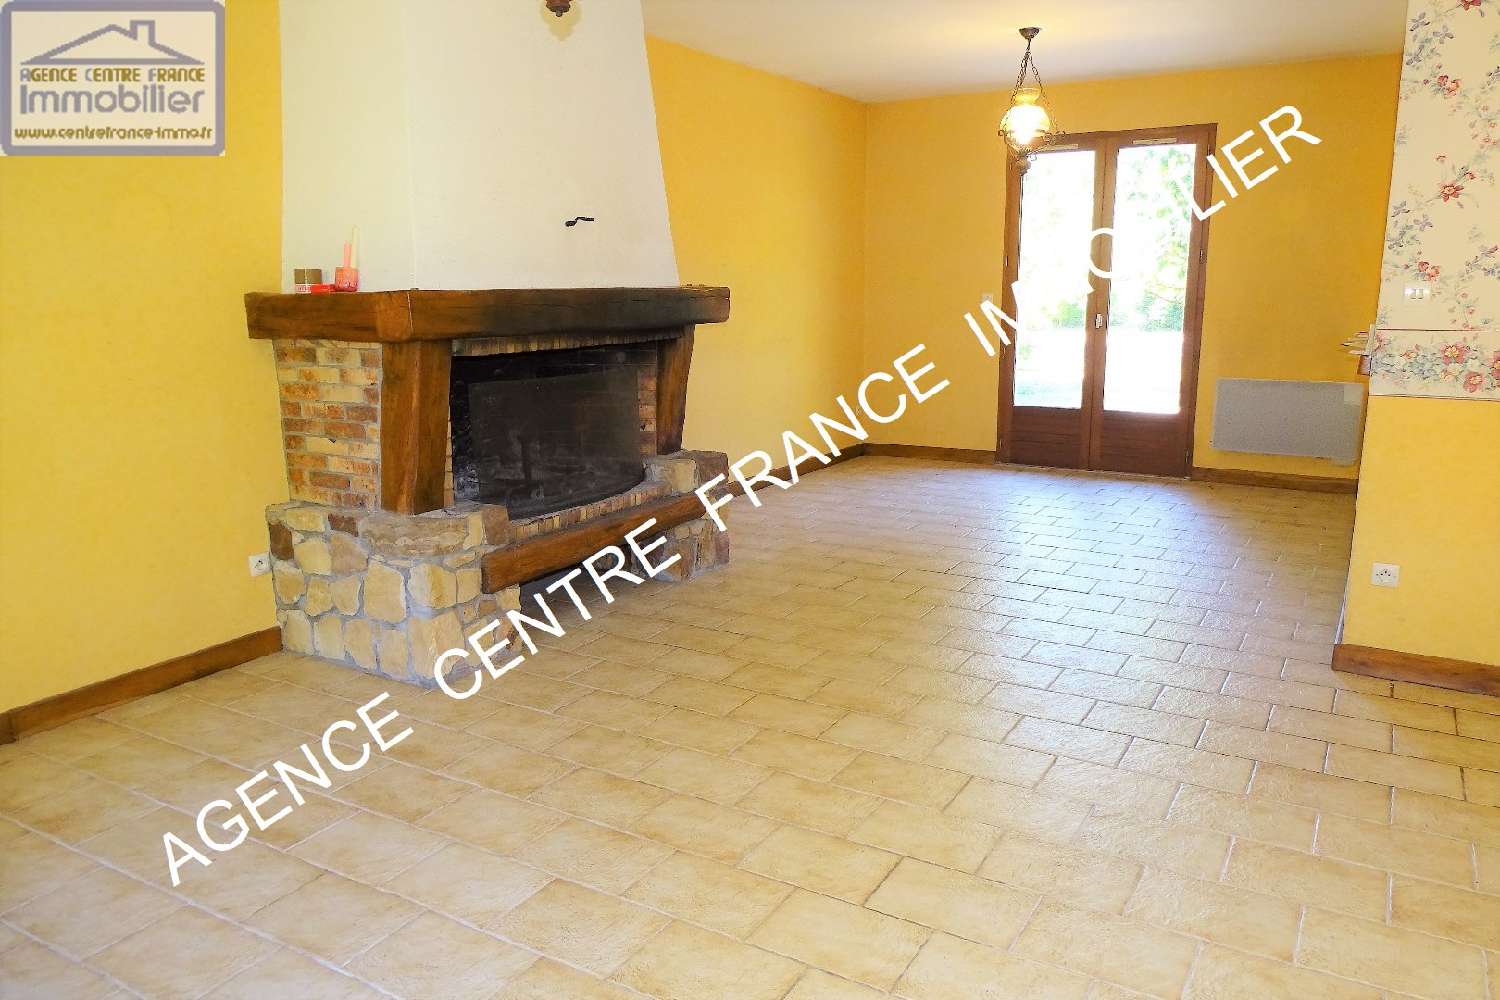  for sale house Marmagne Cher 1